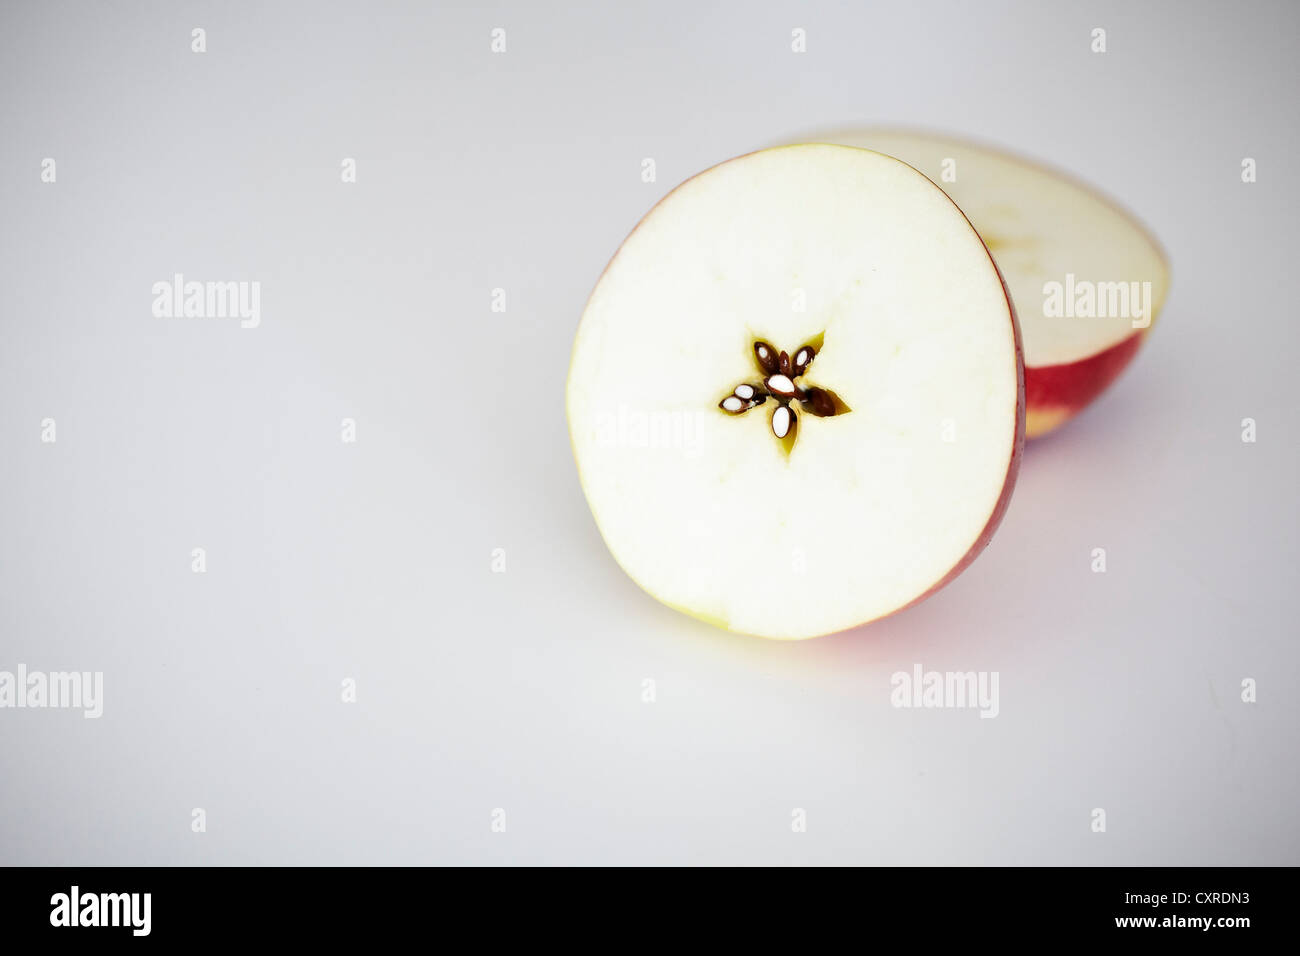 Sliced apple with a center star Stock Photo